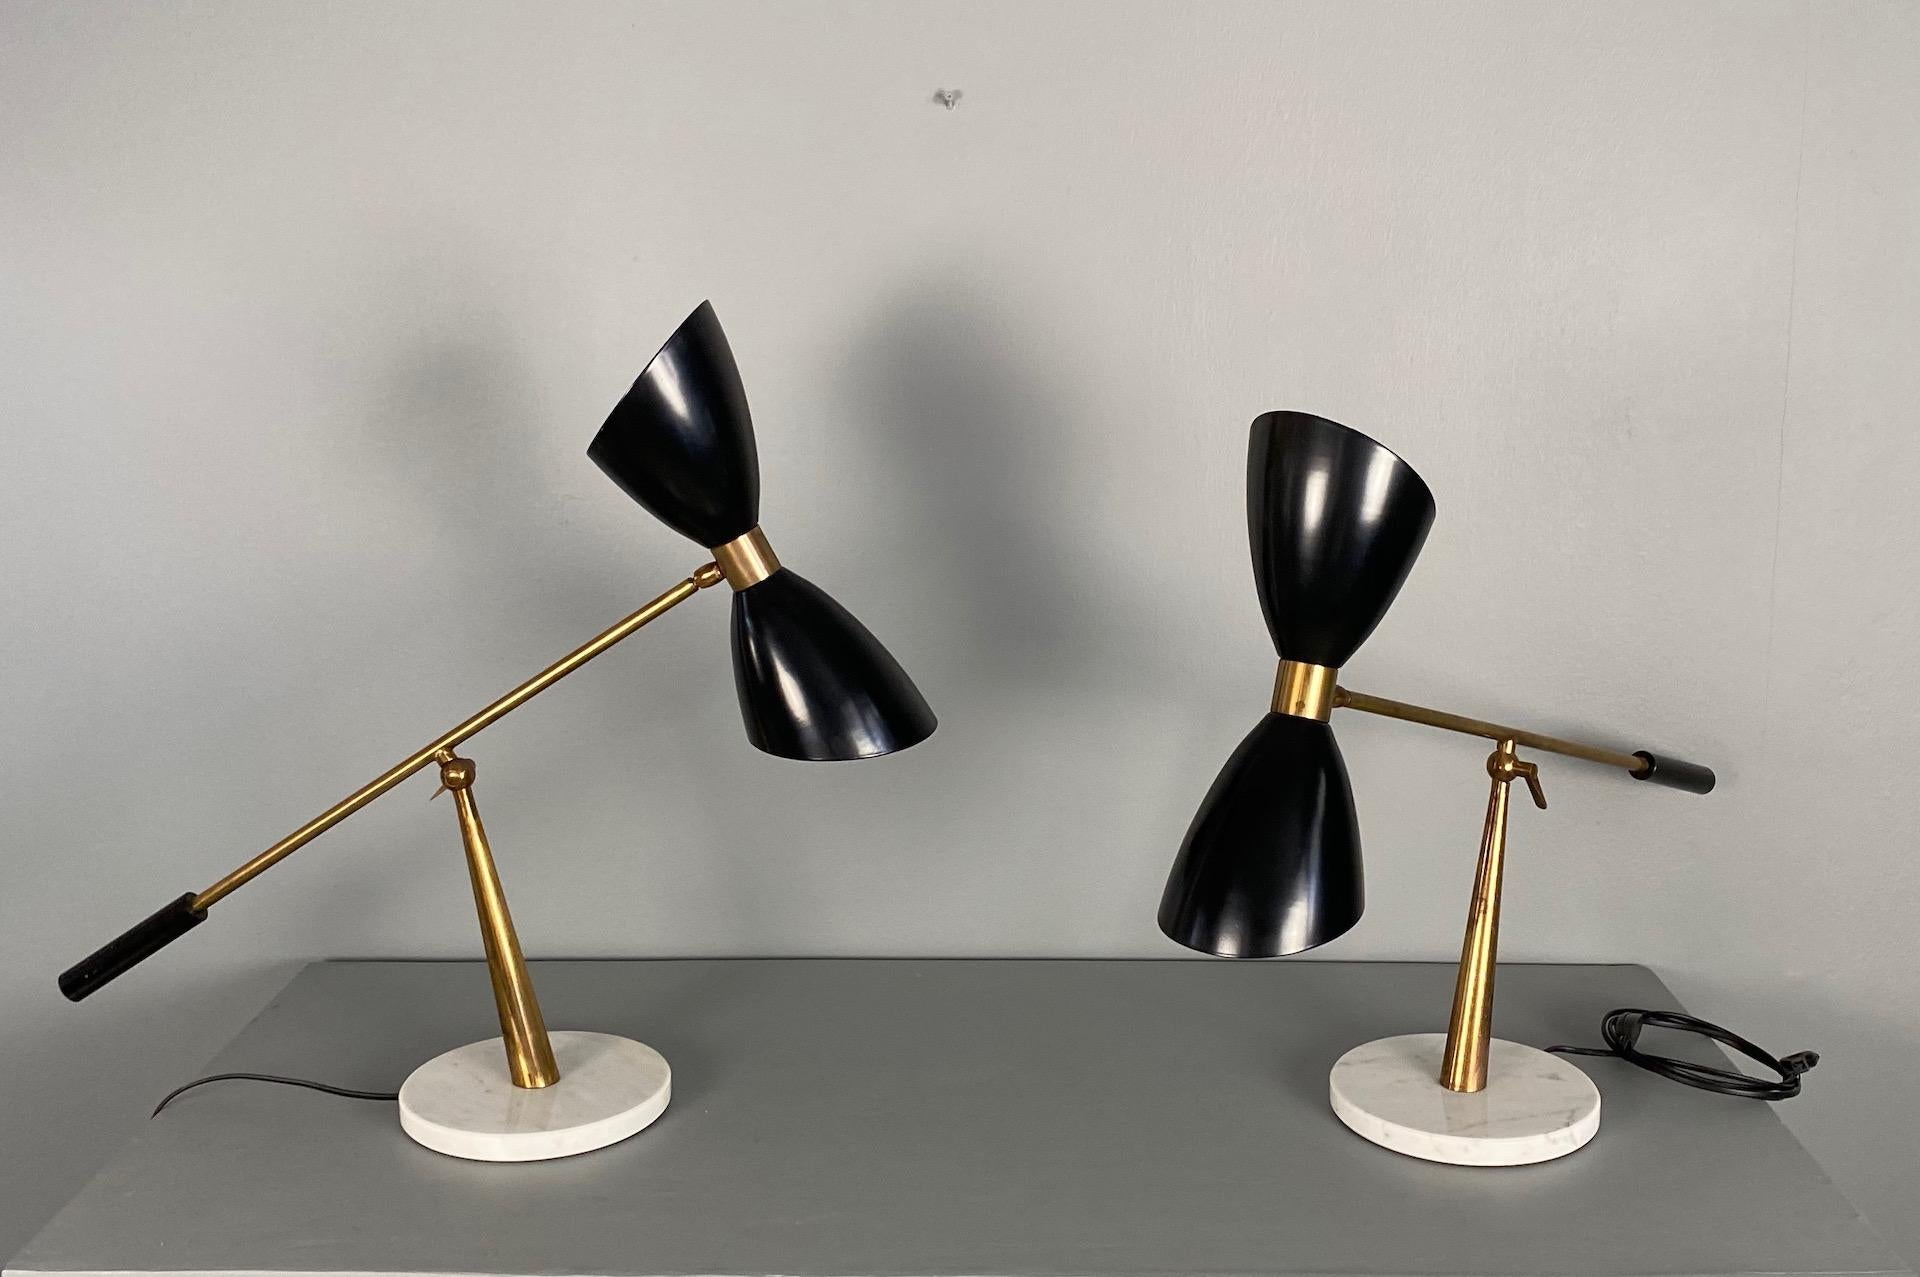 1960s Stilnovo Style Diabolo table lamp with marble foot. Good and working condition, wear consistent with age and use.